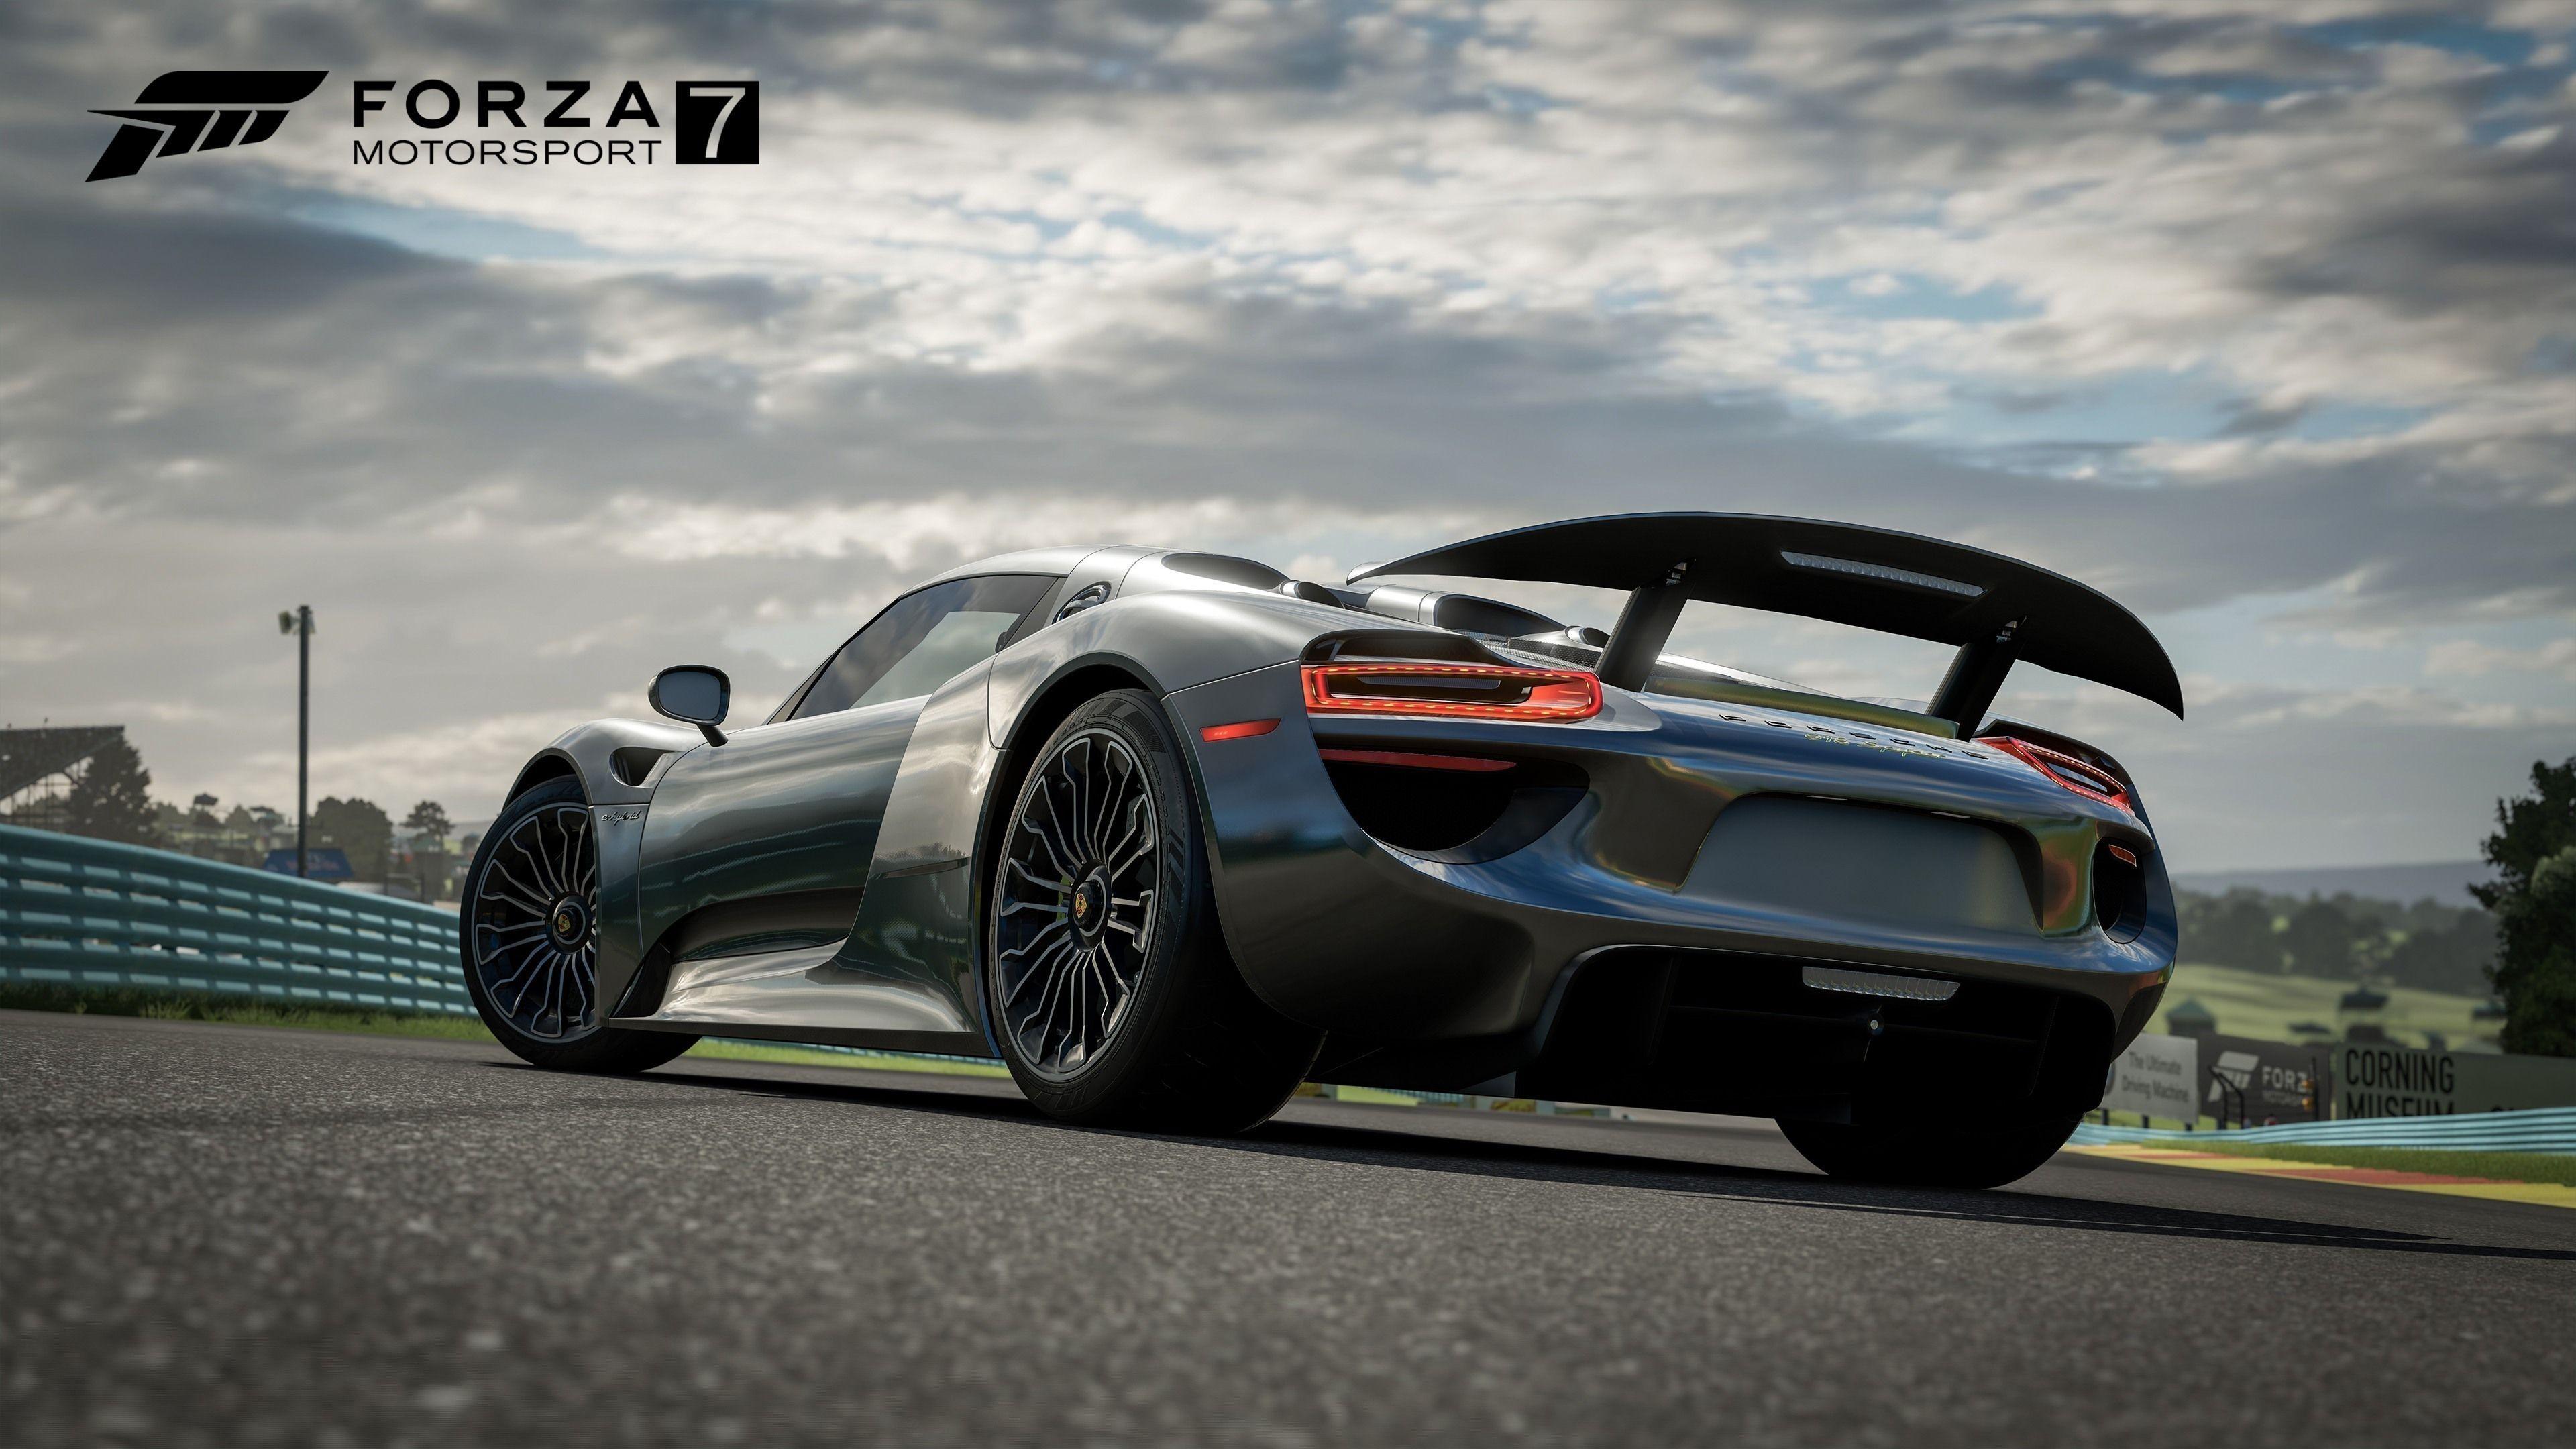 Forza 7 Screenshots, Pictures, Wallpapers